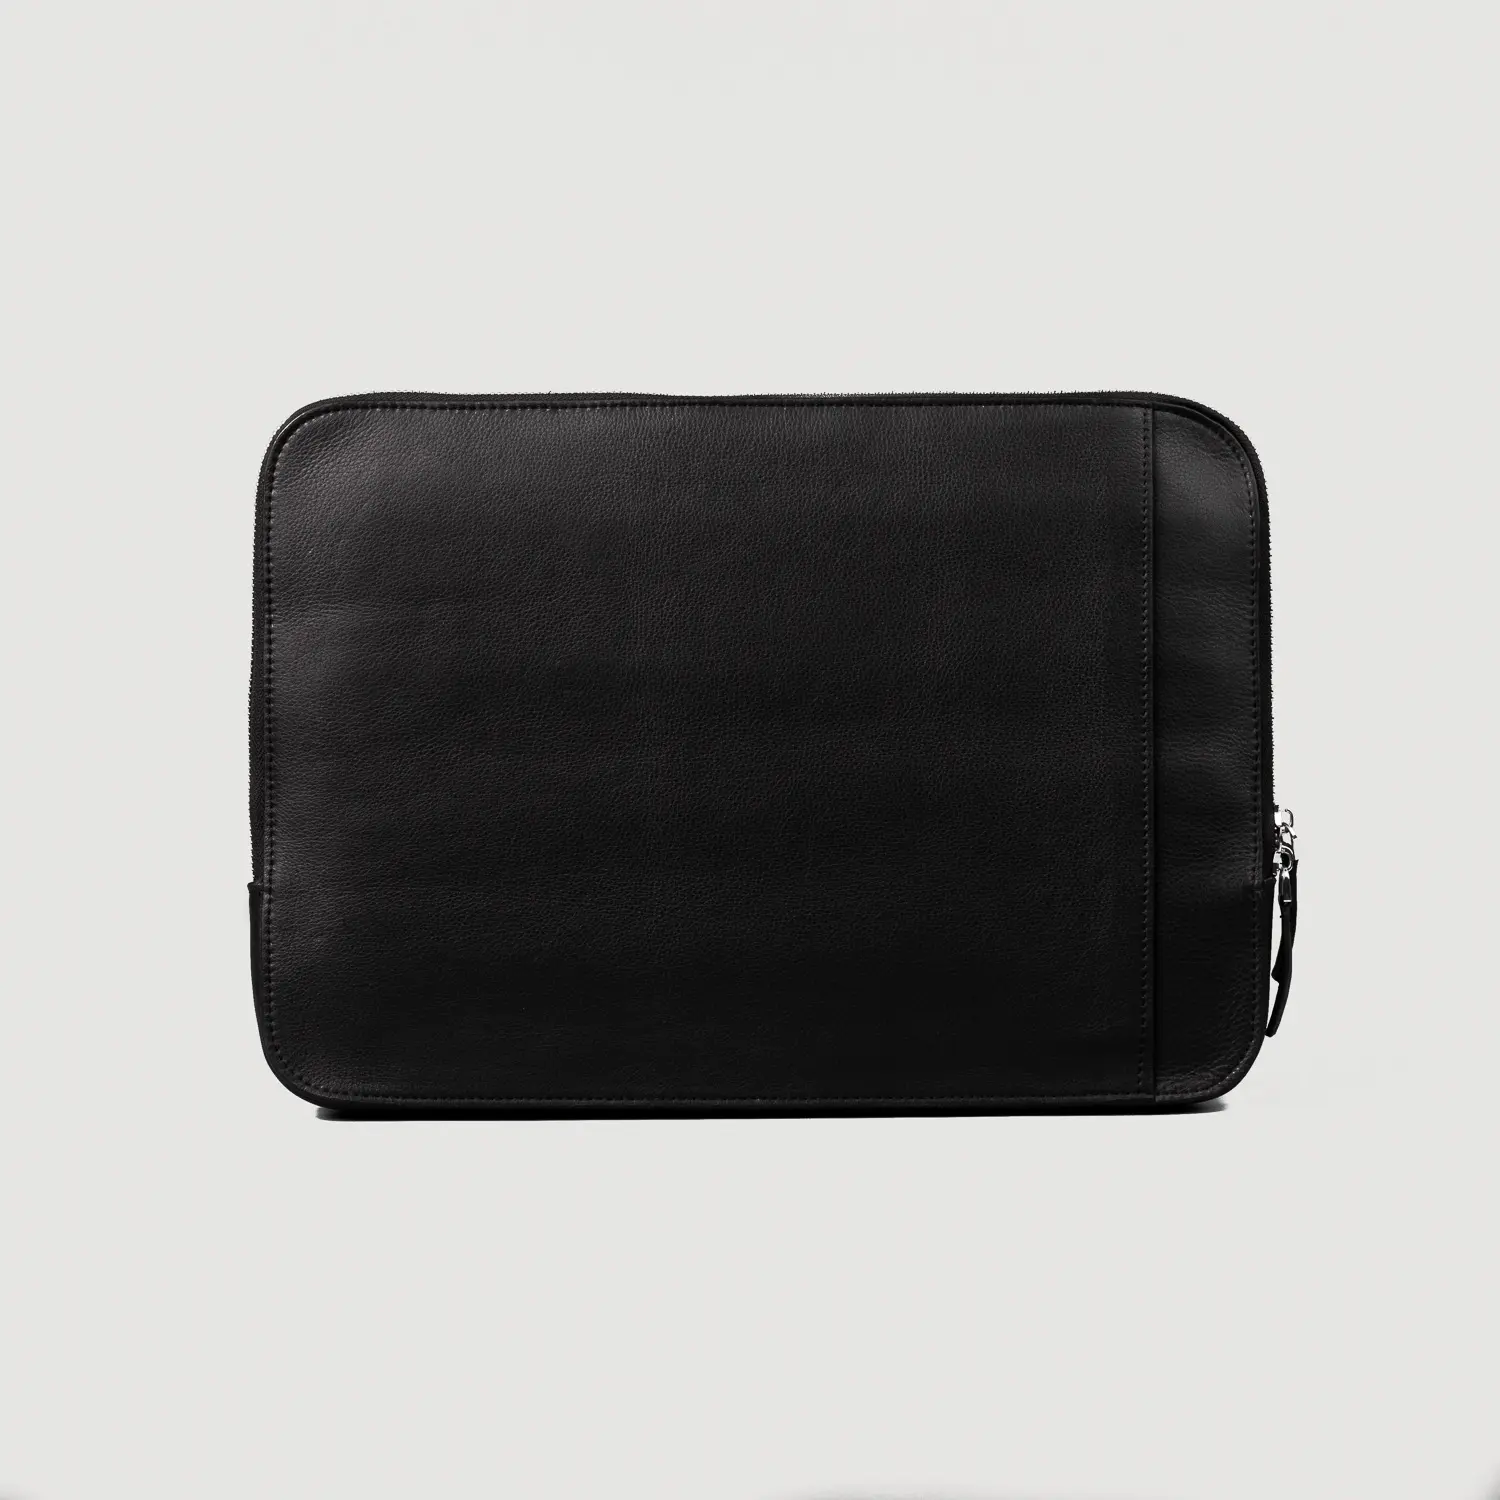 Full Grain Naturally Milled Cowhide Leather Baxter Black Laptop Sleeve with Open Slip Pocket Trolley Strap and Cotton Twill